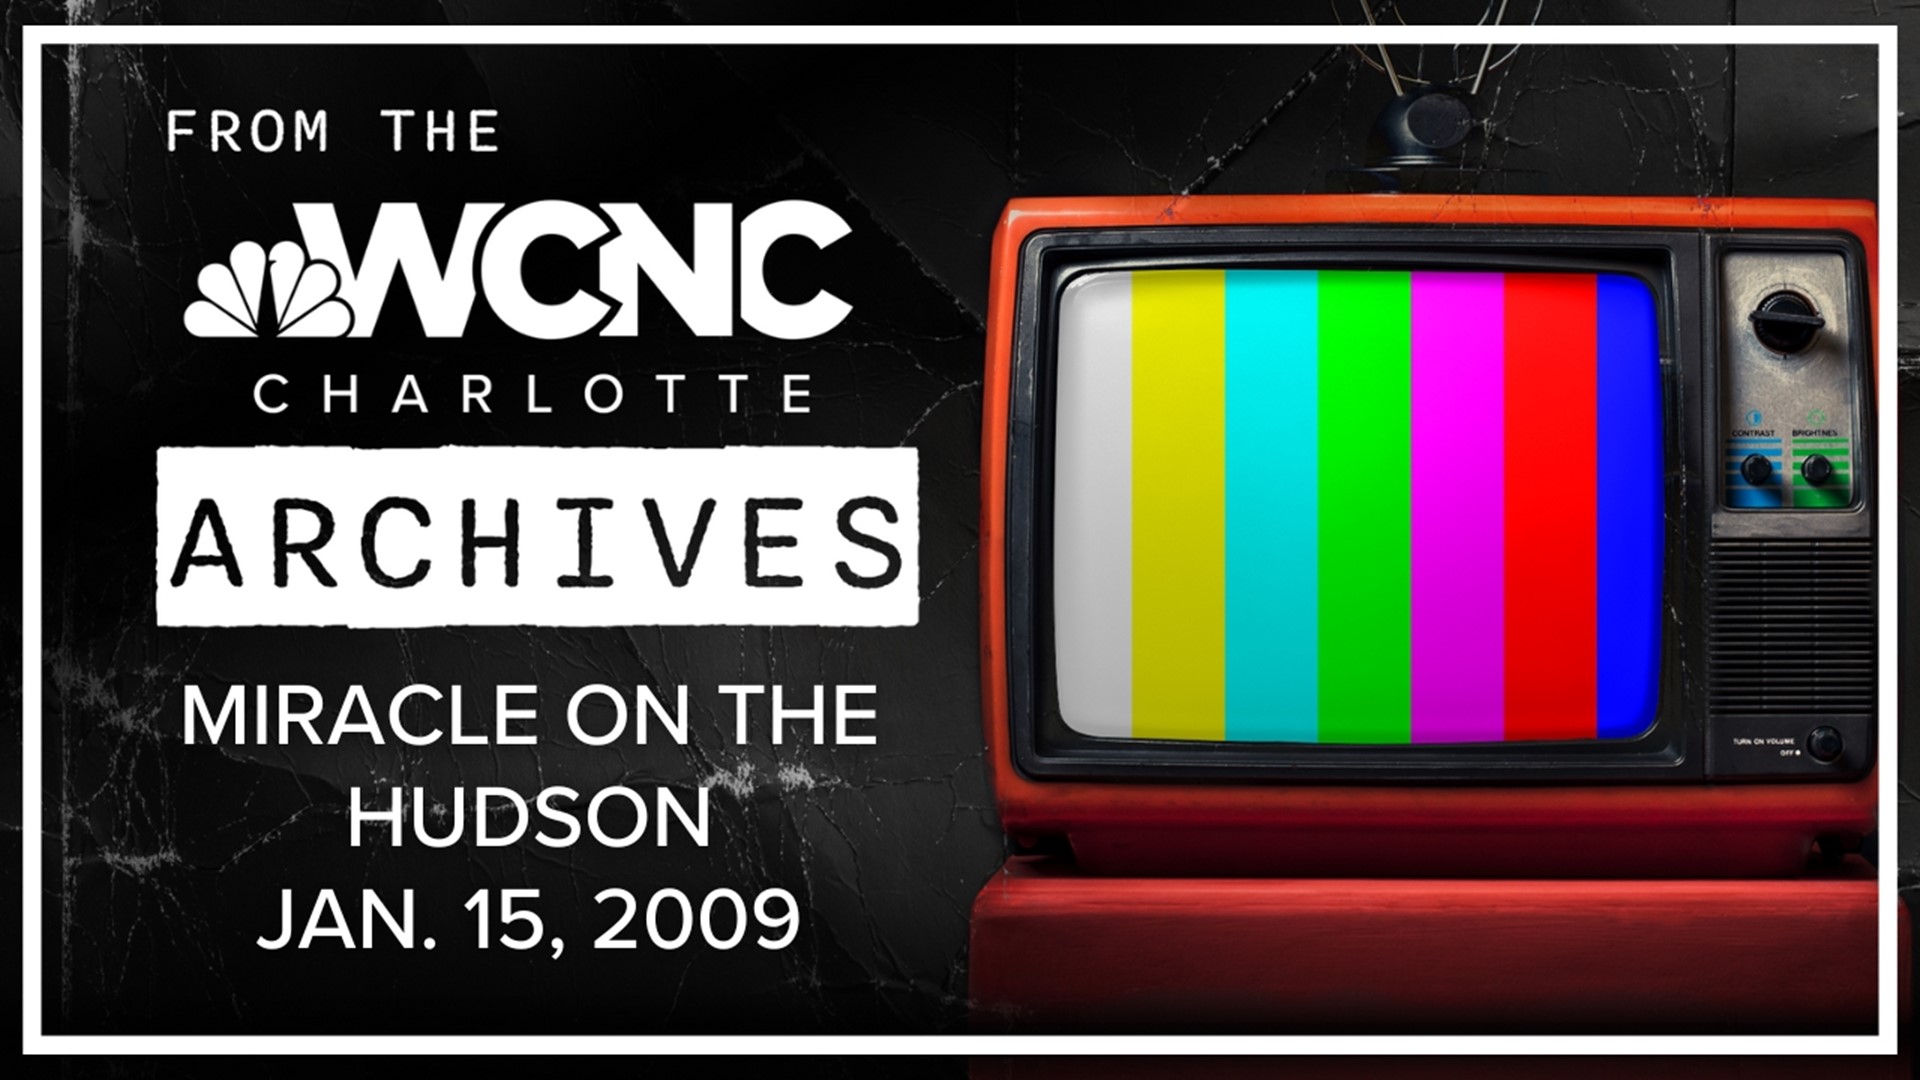 WCNC Charlotte's archival coverage of the Miracle on the Hudson.